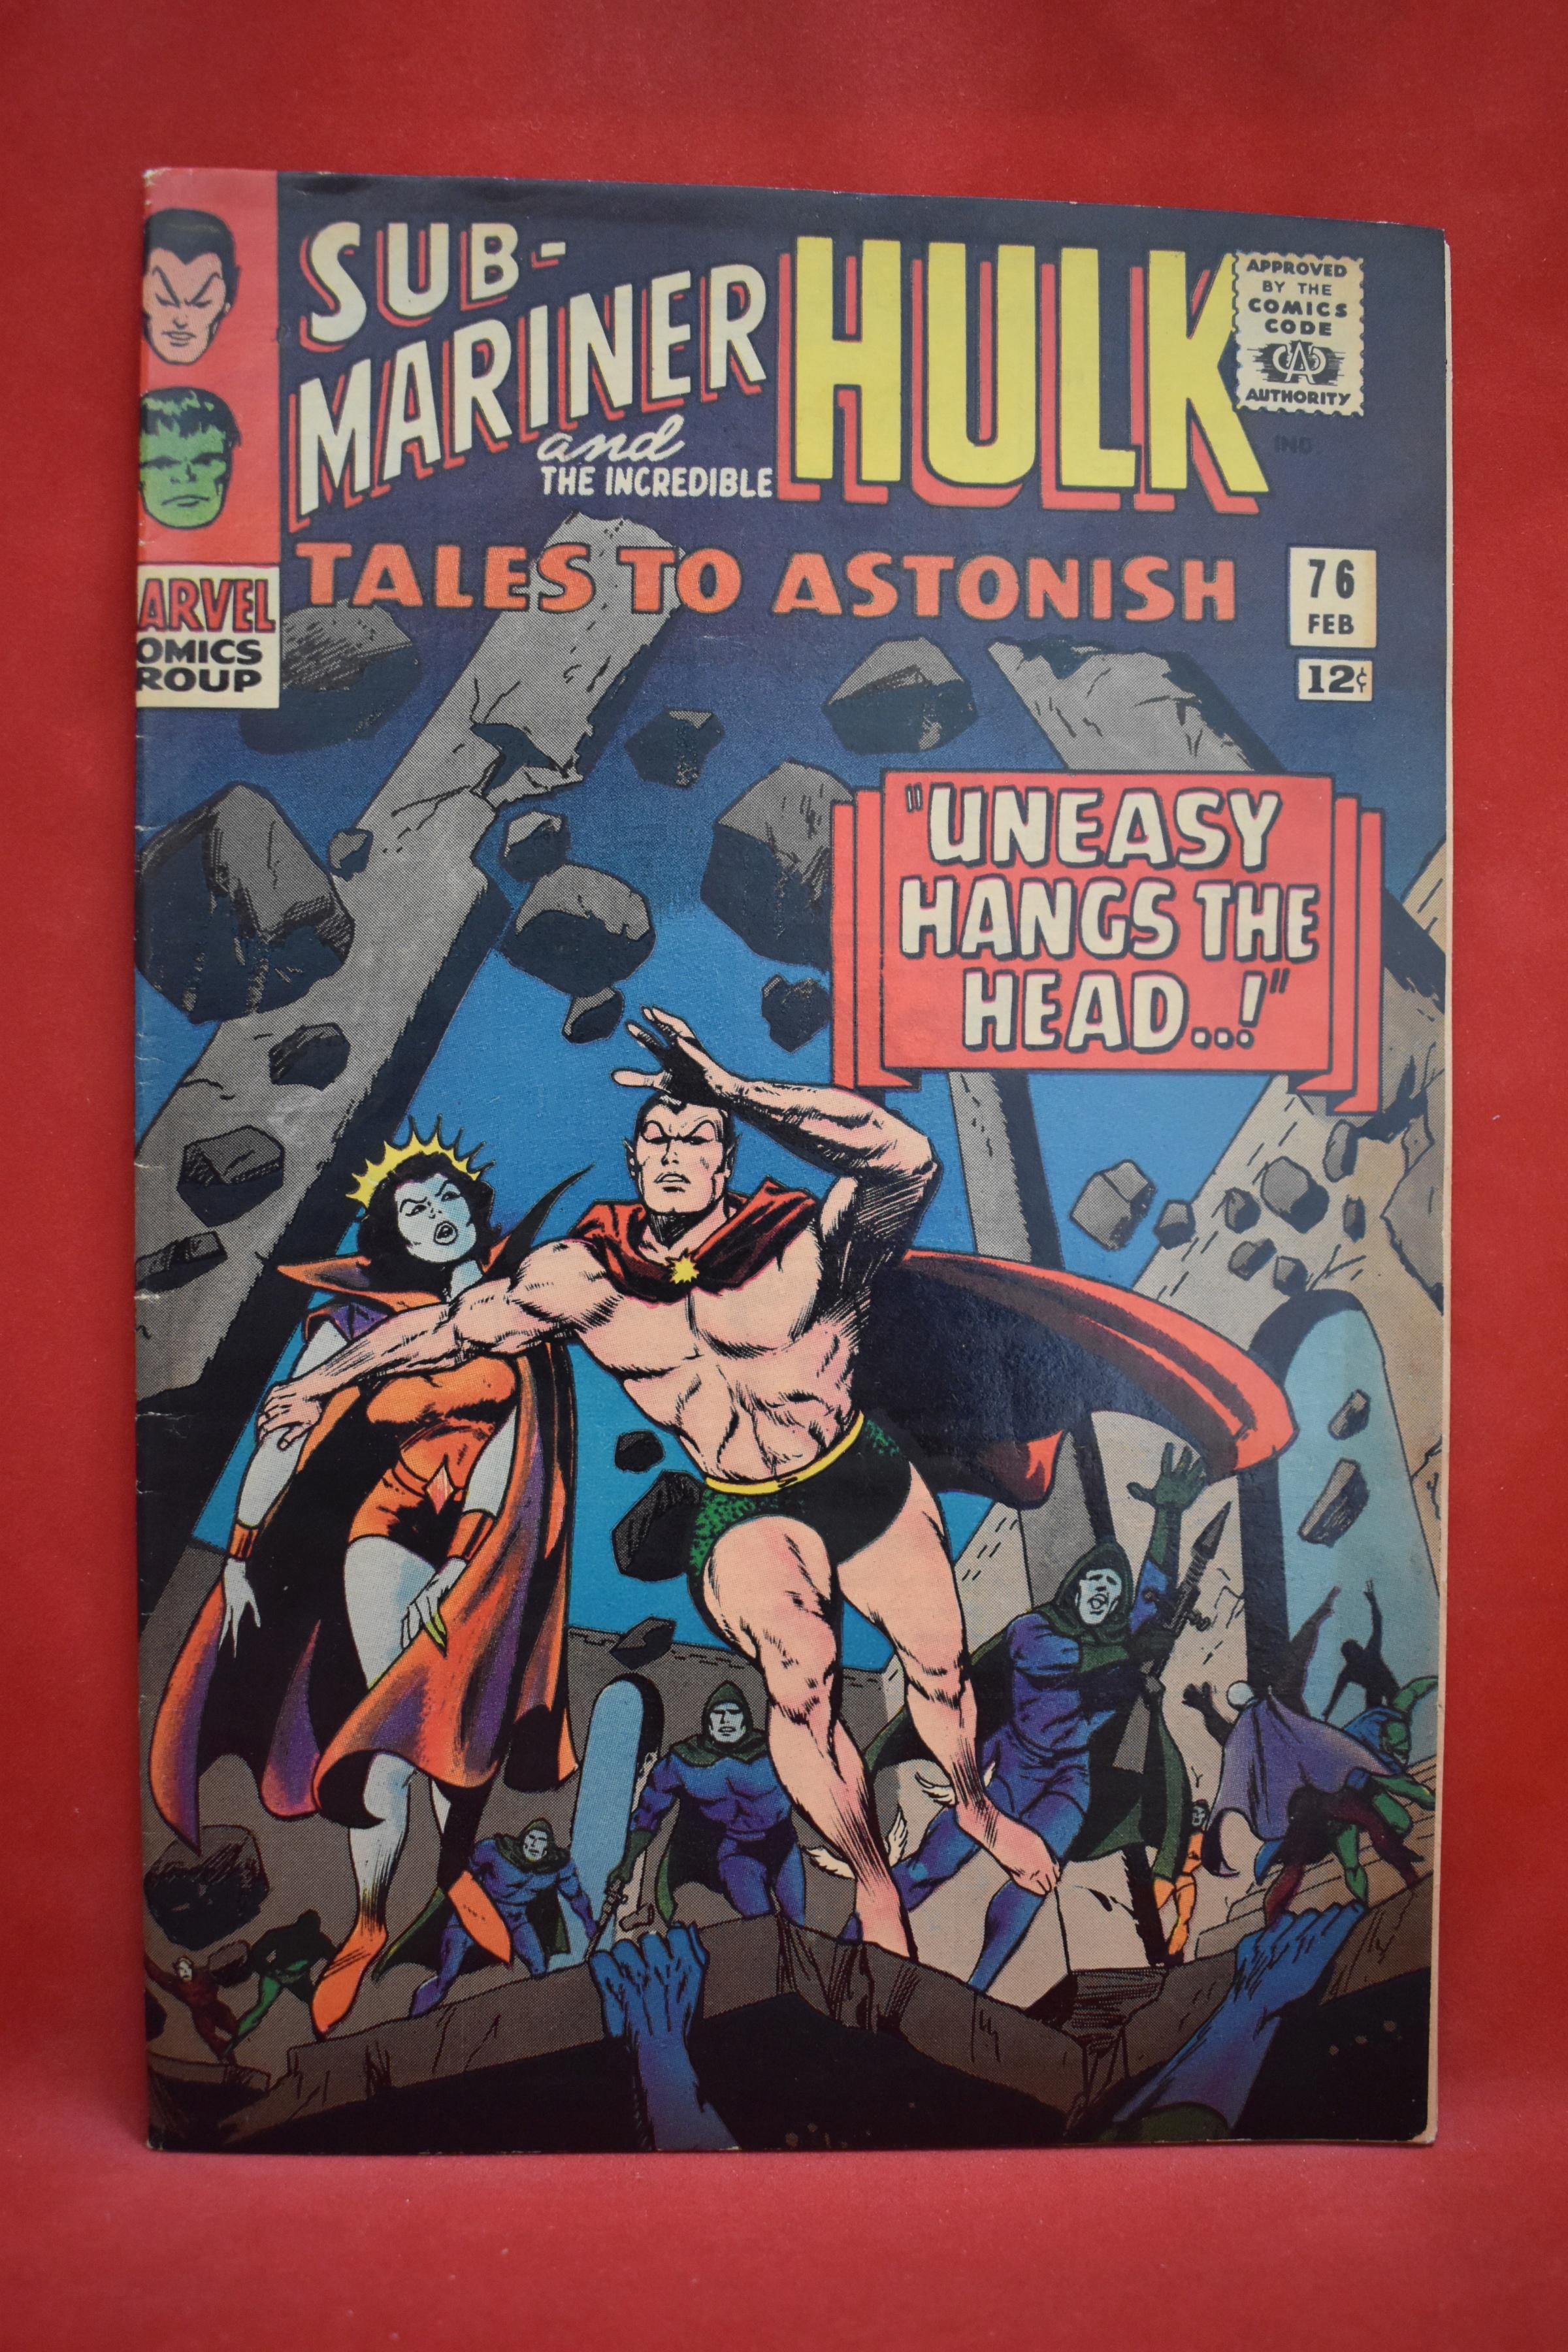 TALES TO ASTONISH #76 | I AGAINST THE WORLD! | STAN LEE, JACK KIRBY, GIL KANE - 1966